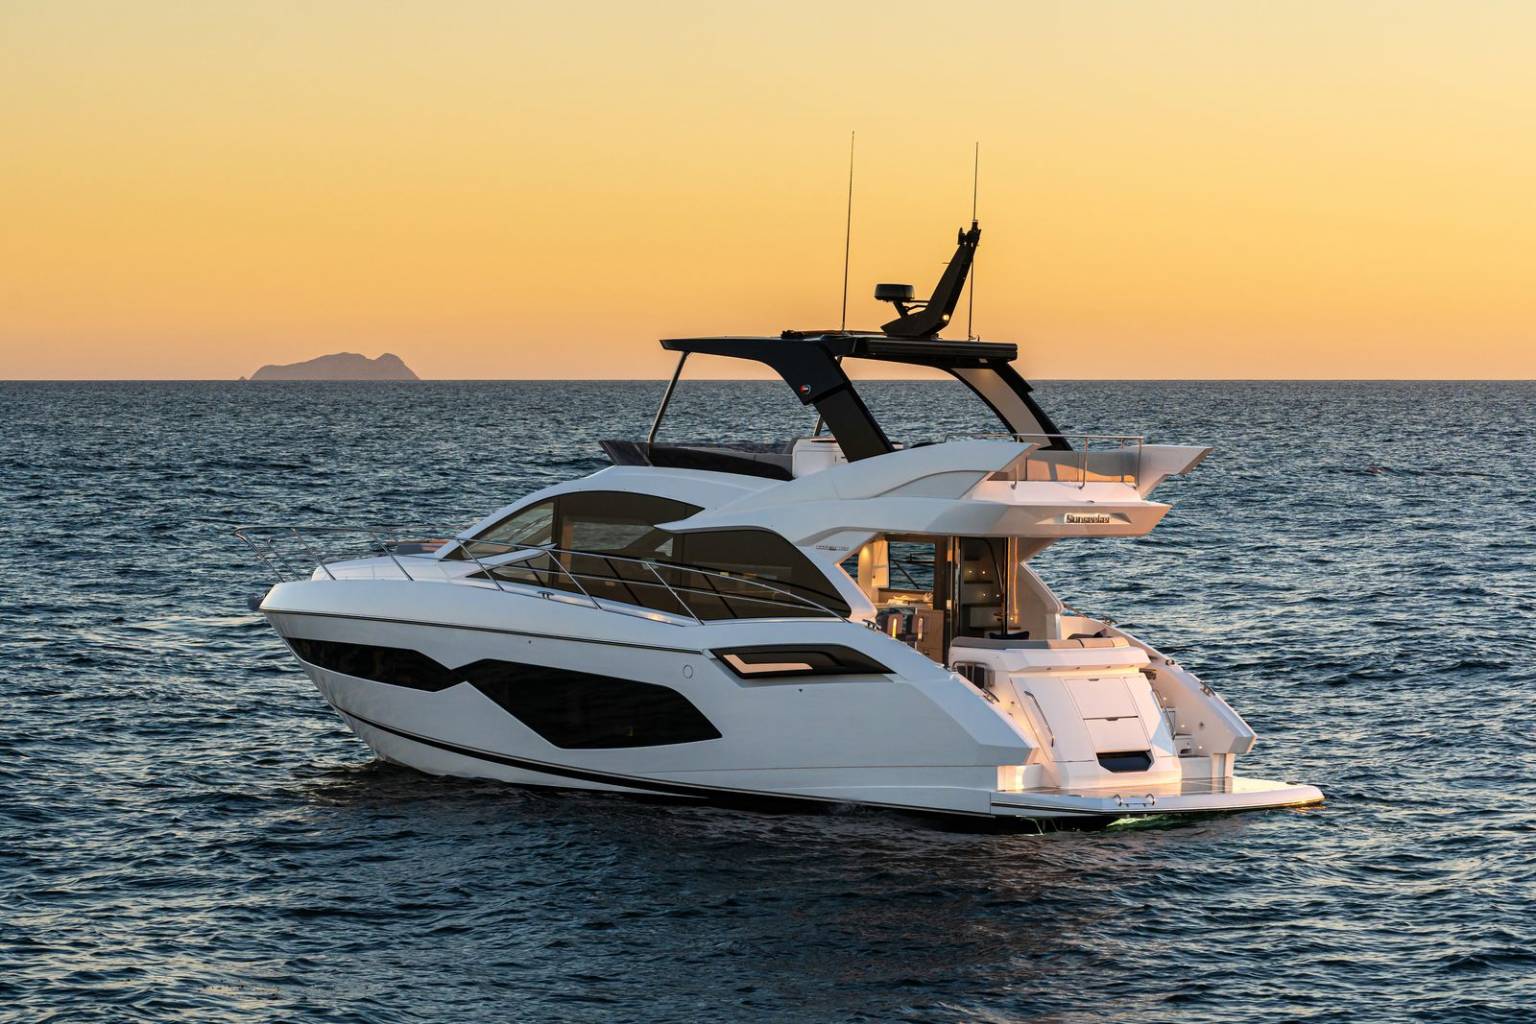 Sailing in luxury: experience working on a Sunseeker yacht in Israel